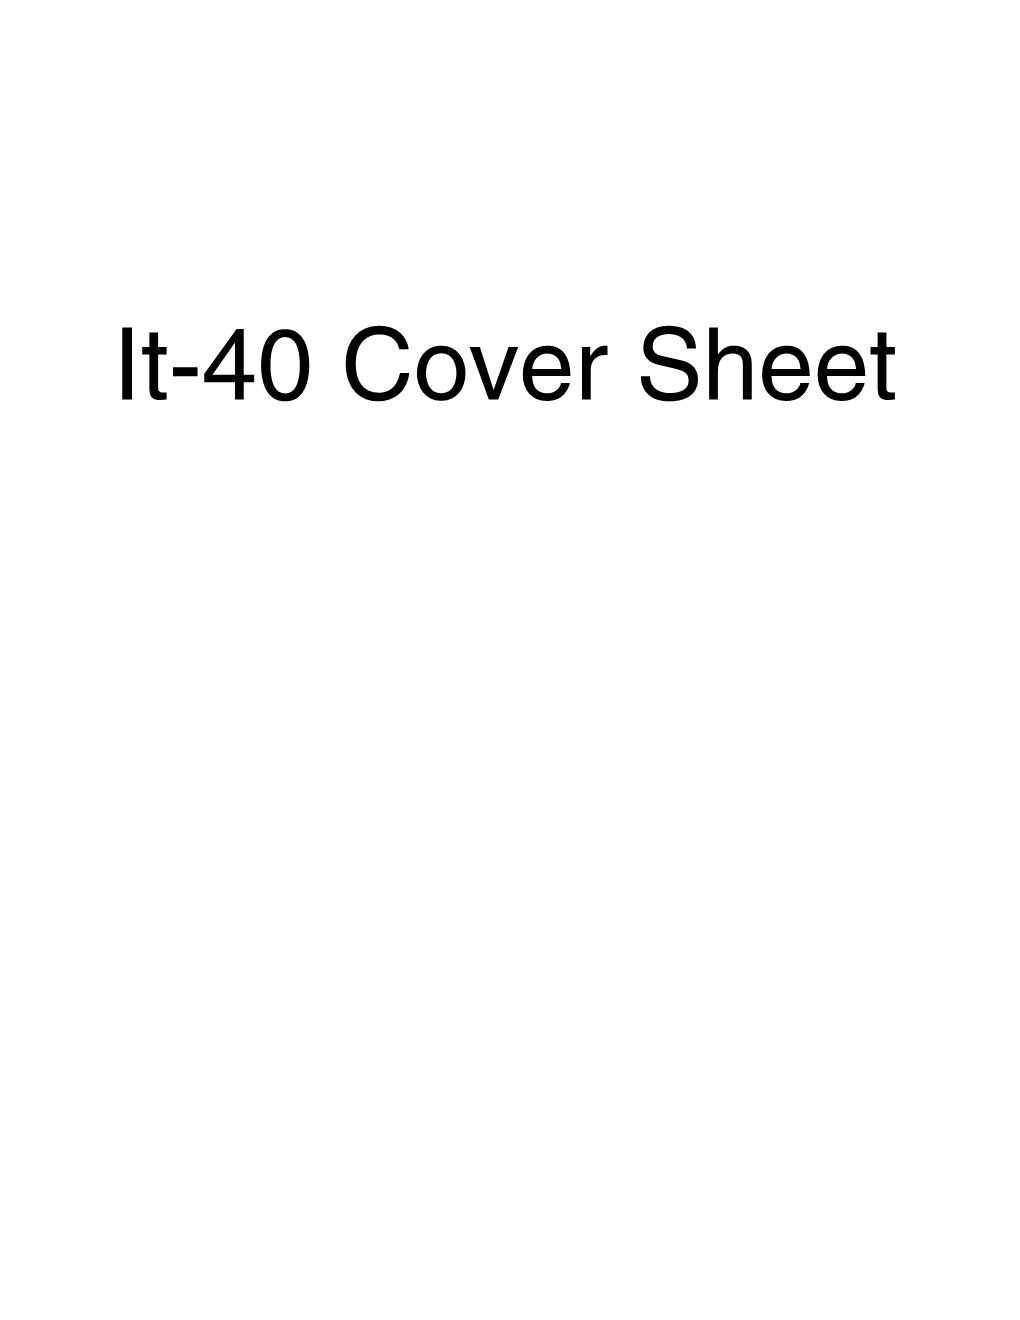 It-40 Cover Sheet STATE of INDIANA INDIANAPOLIS, in 46204-2253 DEPARTMENT of REVENUE